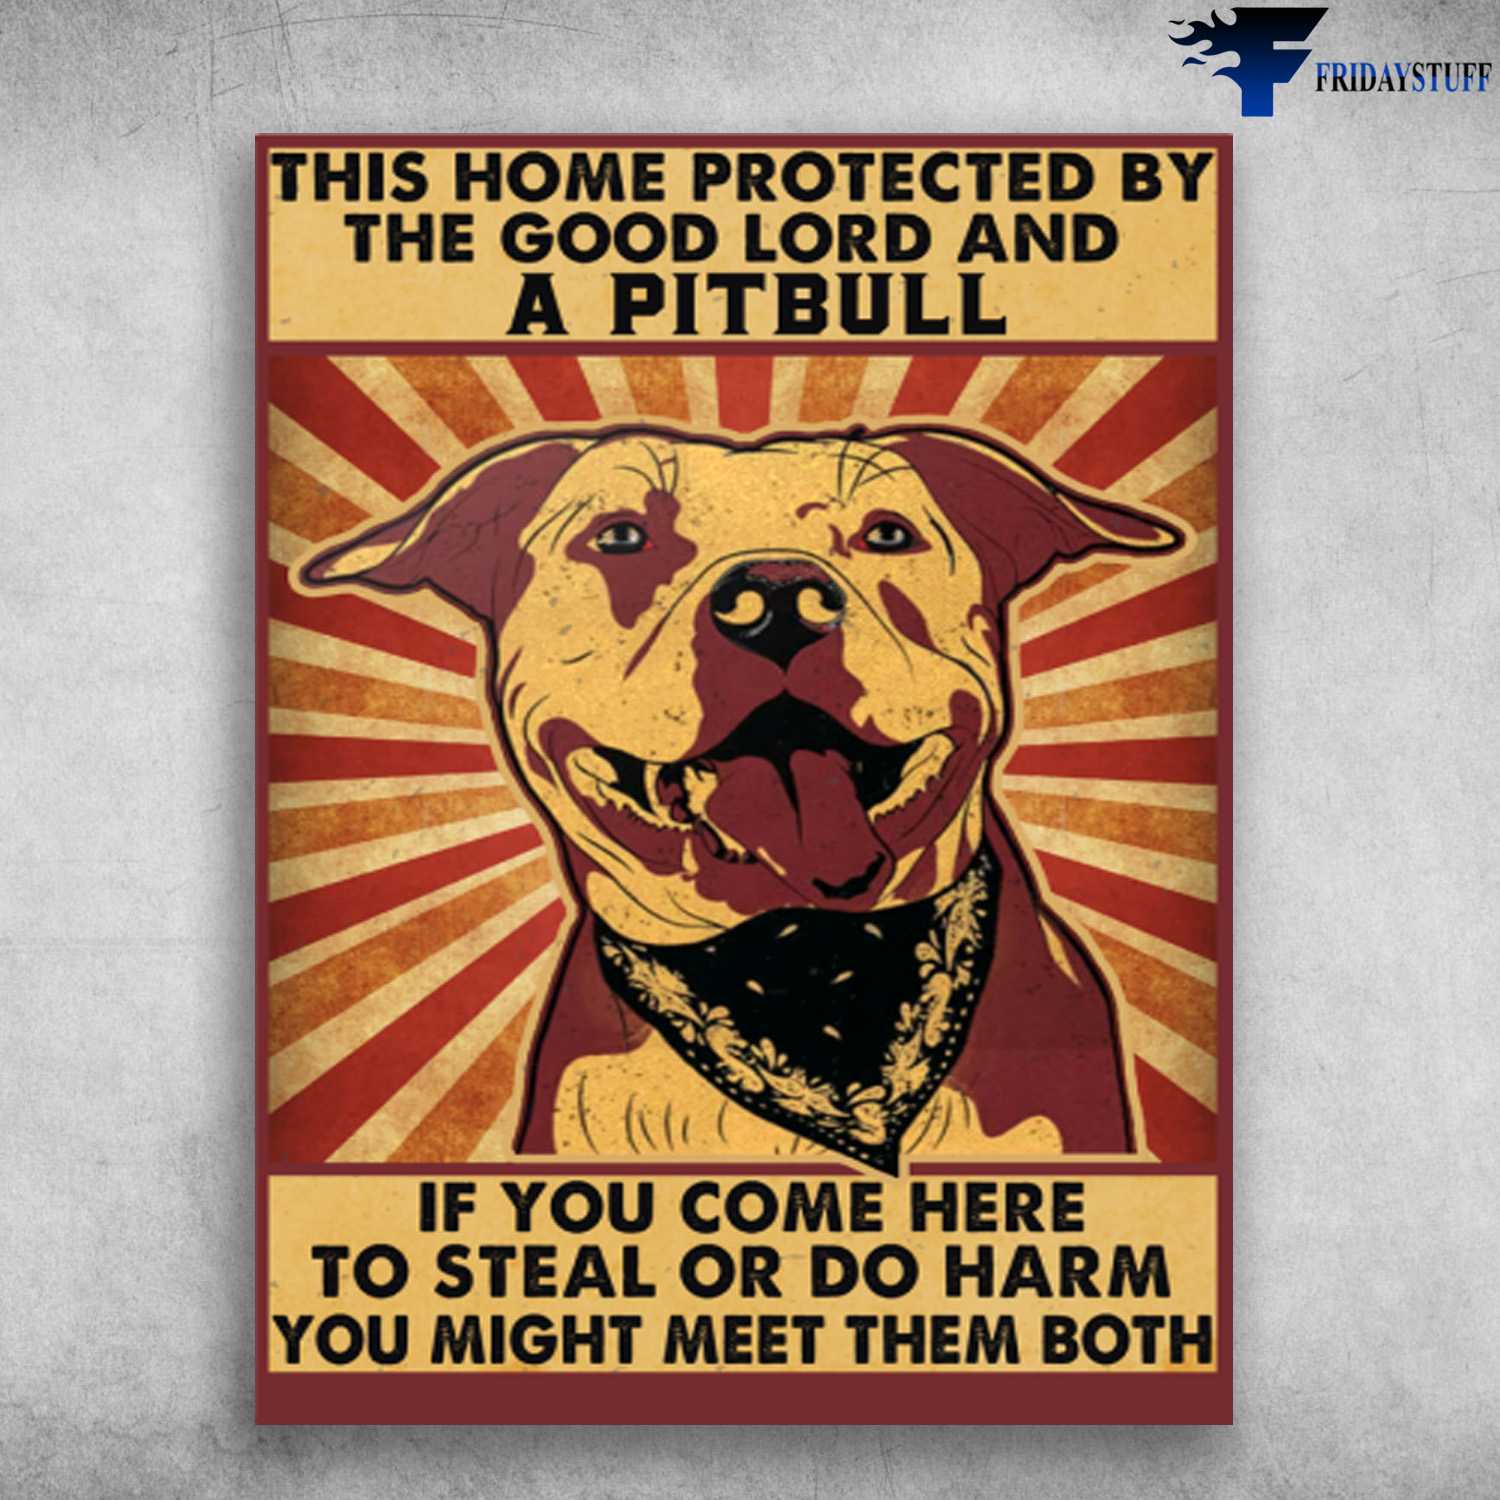 Pitbull Dog - This Home Protected By, The Good Lord And A Pitbull, If You Come Here, To Steal Or Do Harm, You Might Meet Them Both